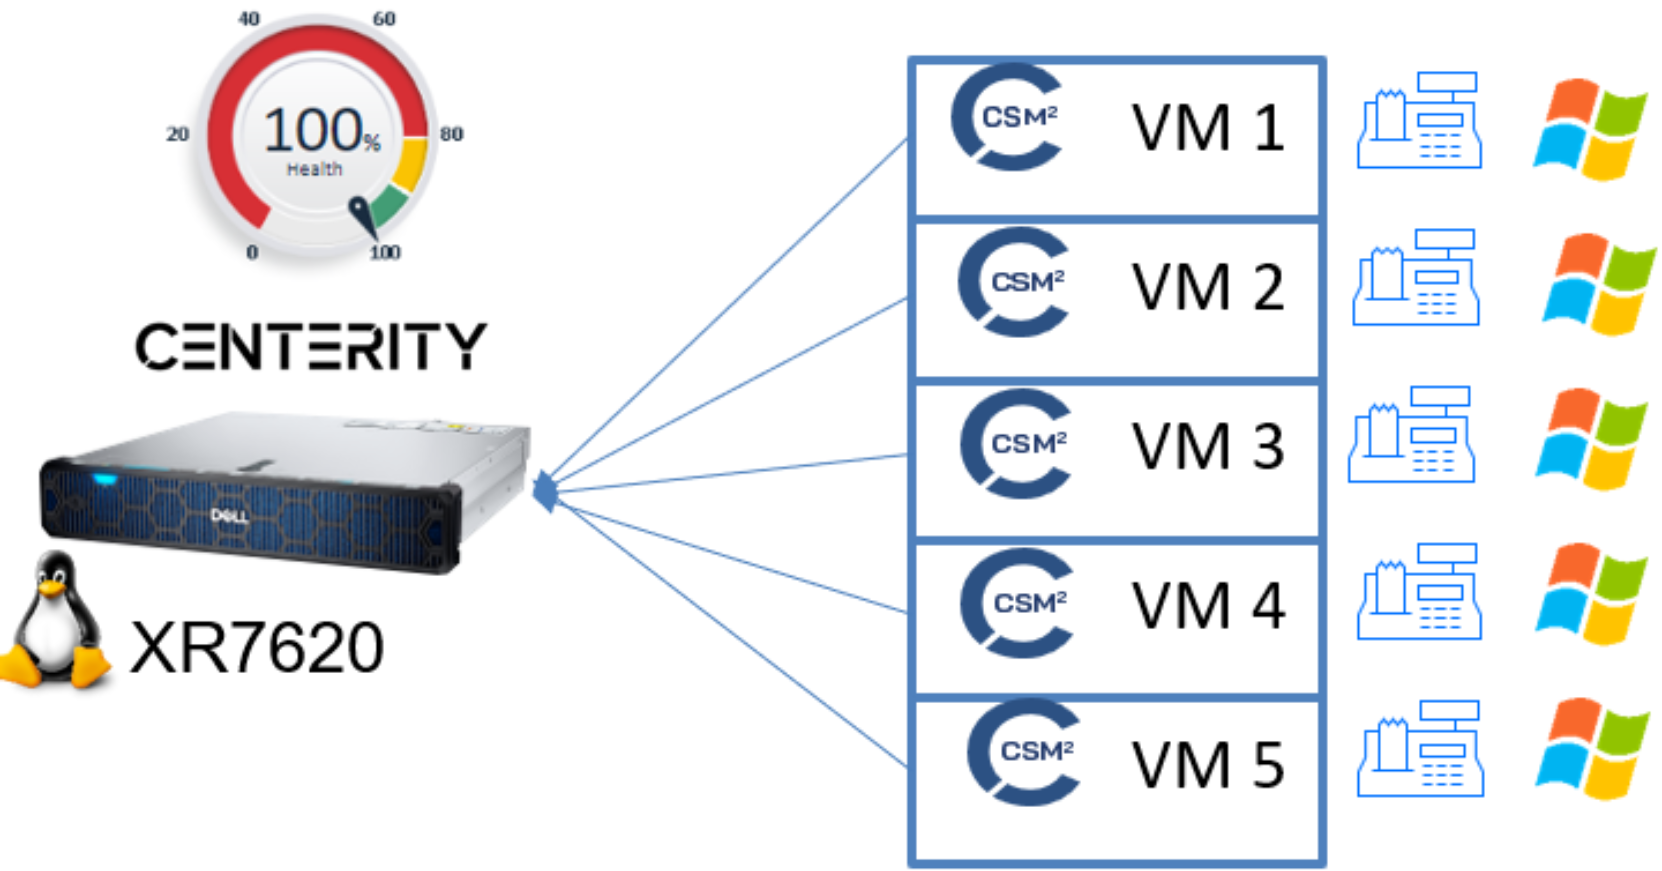 Centerity Software was installed on Dell PowerEdge XR7620 and connected with a Dell PowerEdge HS server that hosts five Windows OS based Virtual Machines.